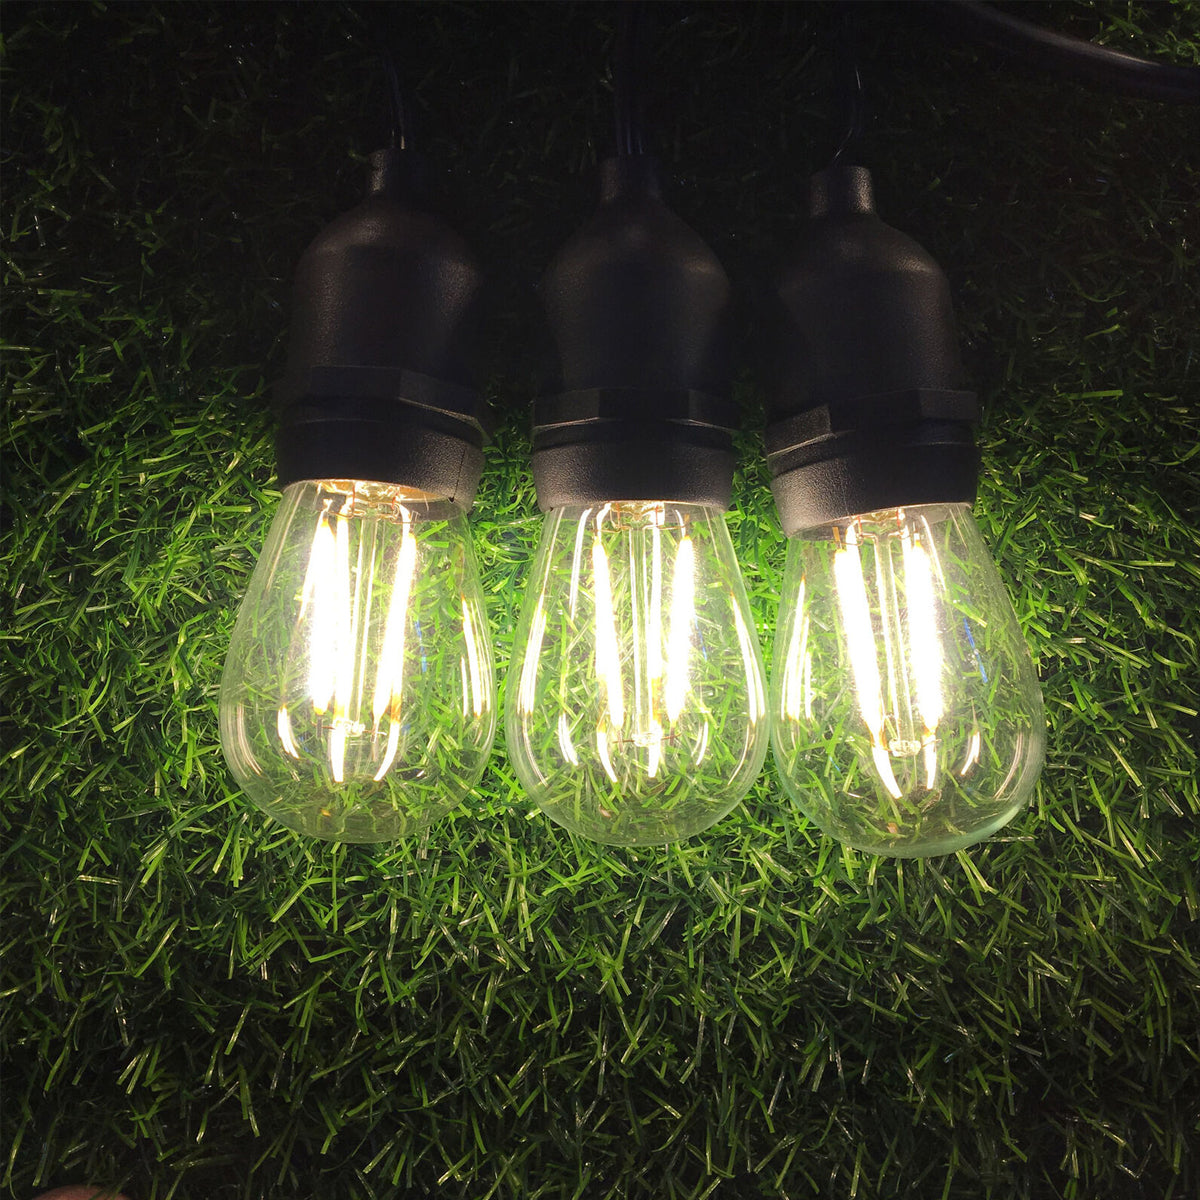 Festoon lighting kit. Transform your space and achieve a stylish glow with our ever popular festoon lighting kit. Our kits will allow you to connect up to 5 kits together and run off the same one plug at a low voltage.